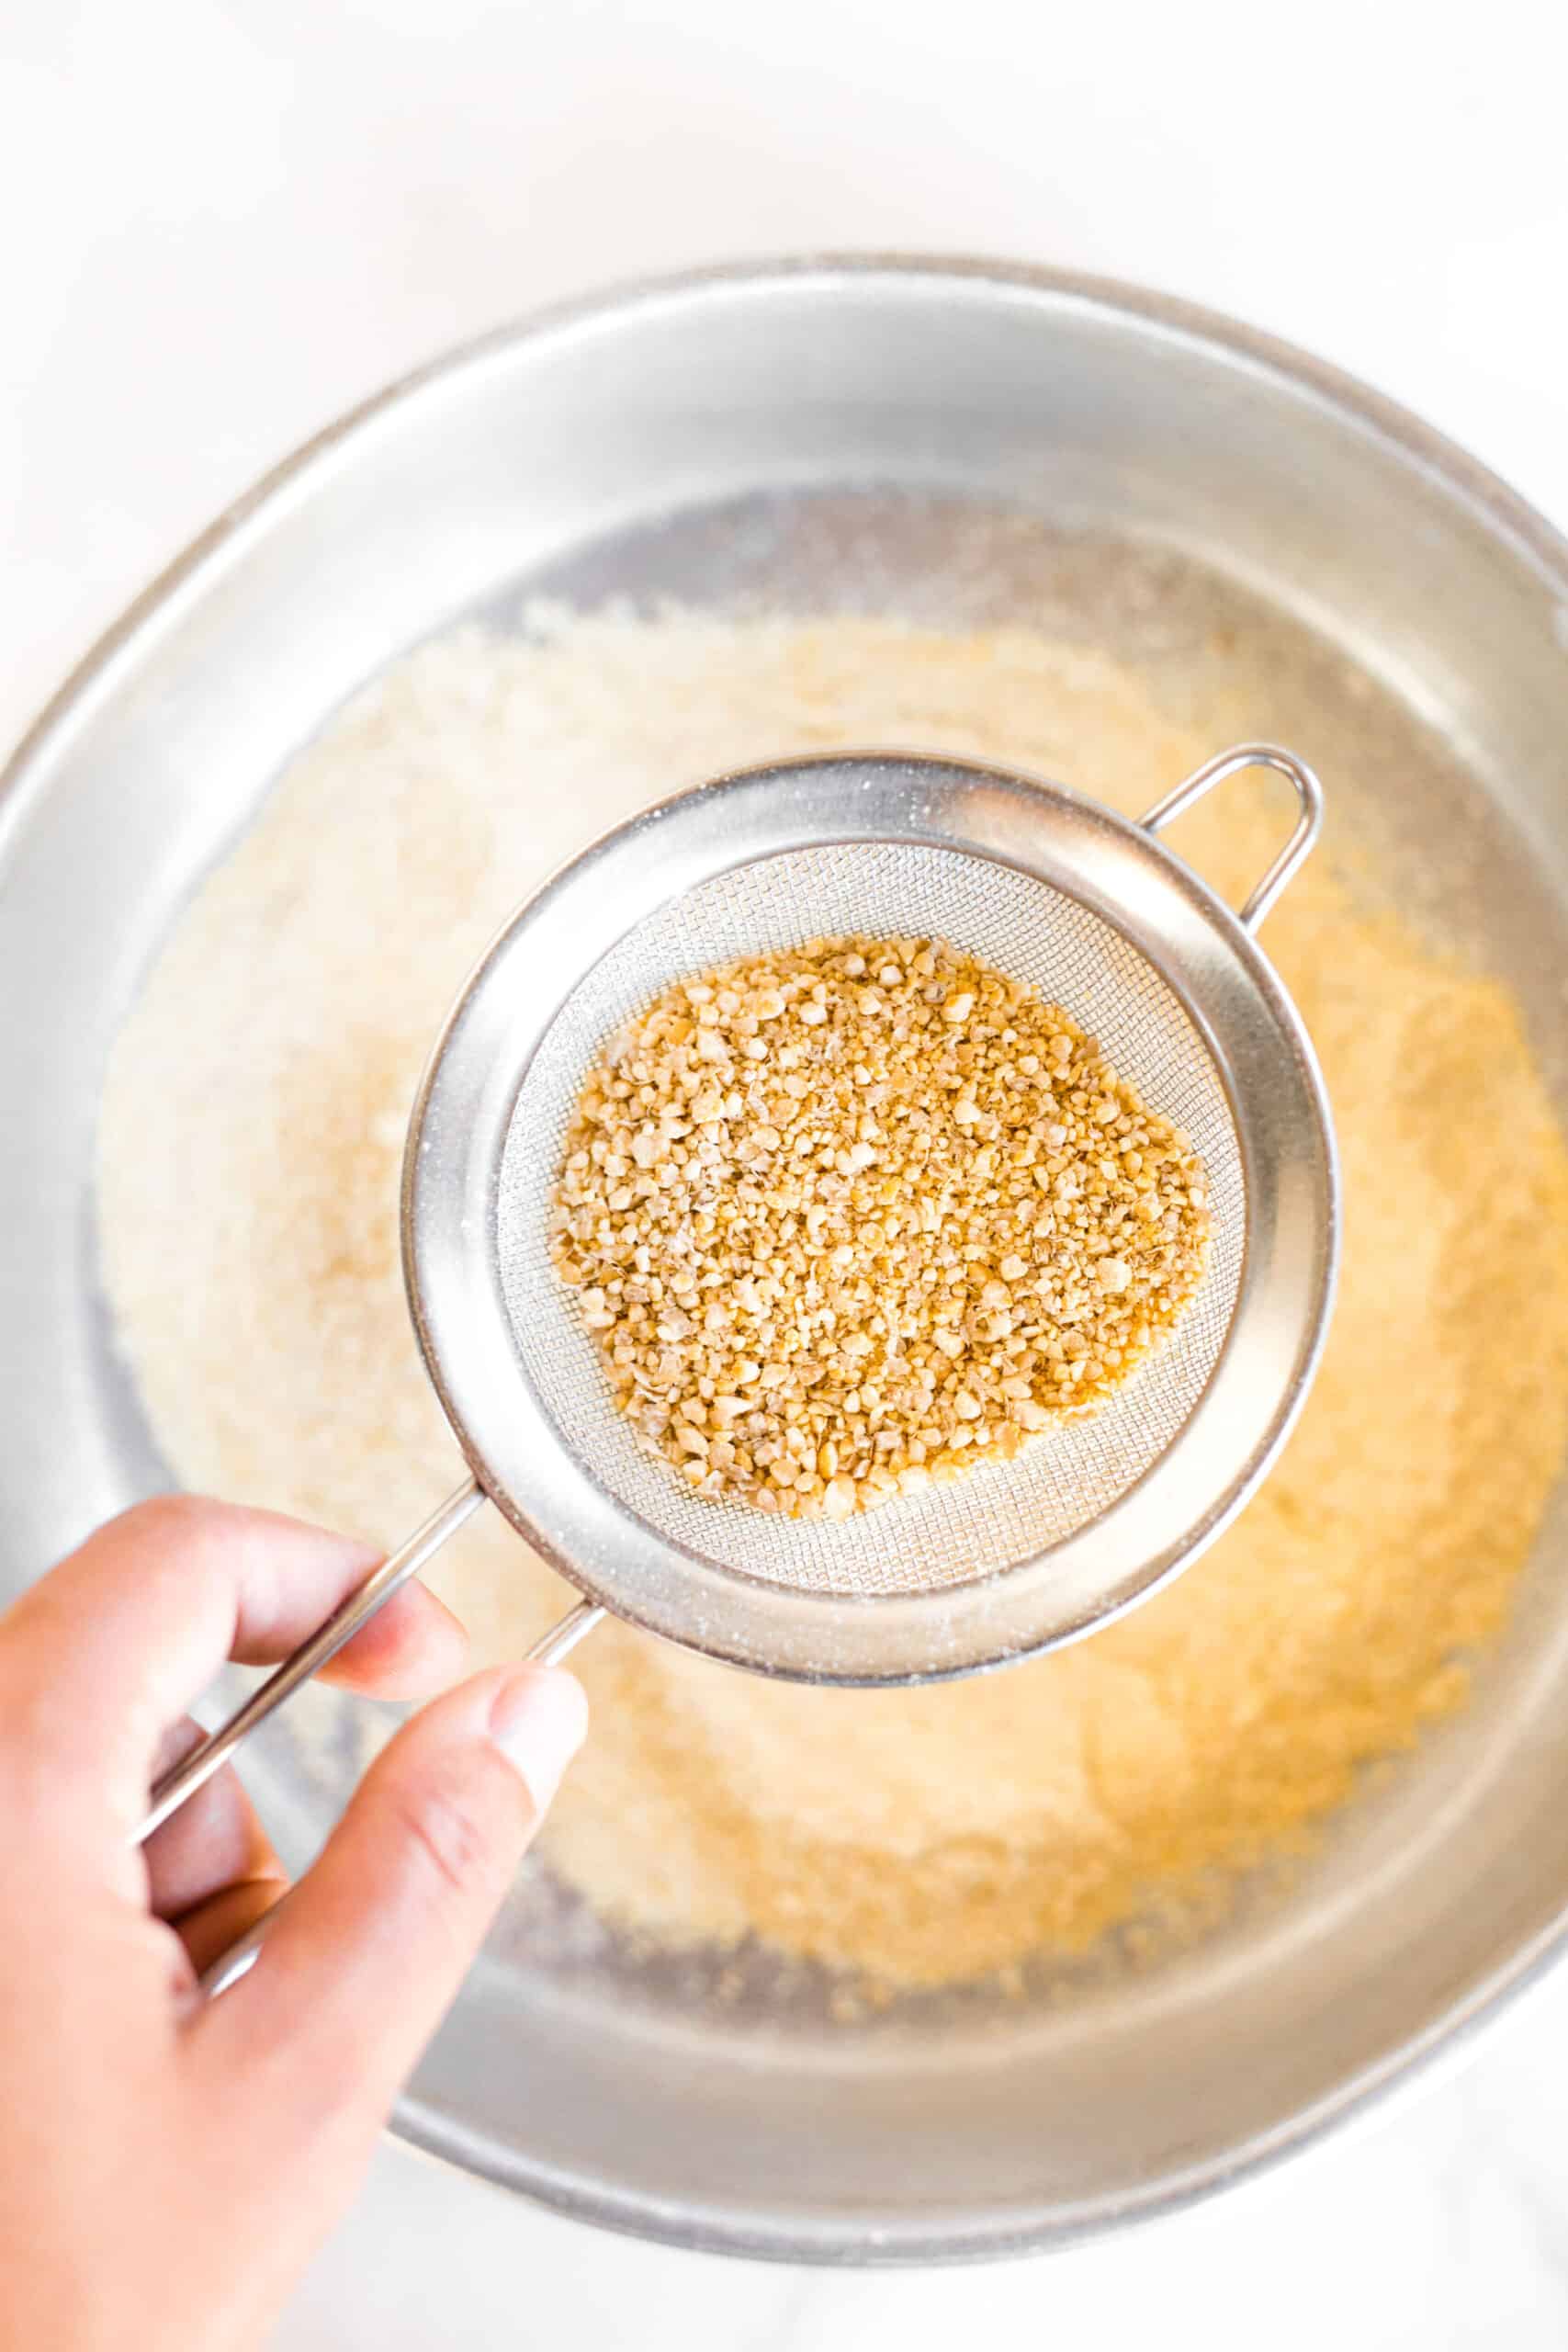 Holding up a fine mesh sieve with pieces of chickpeas.